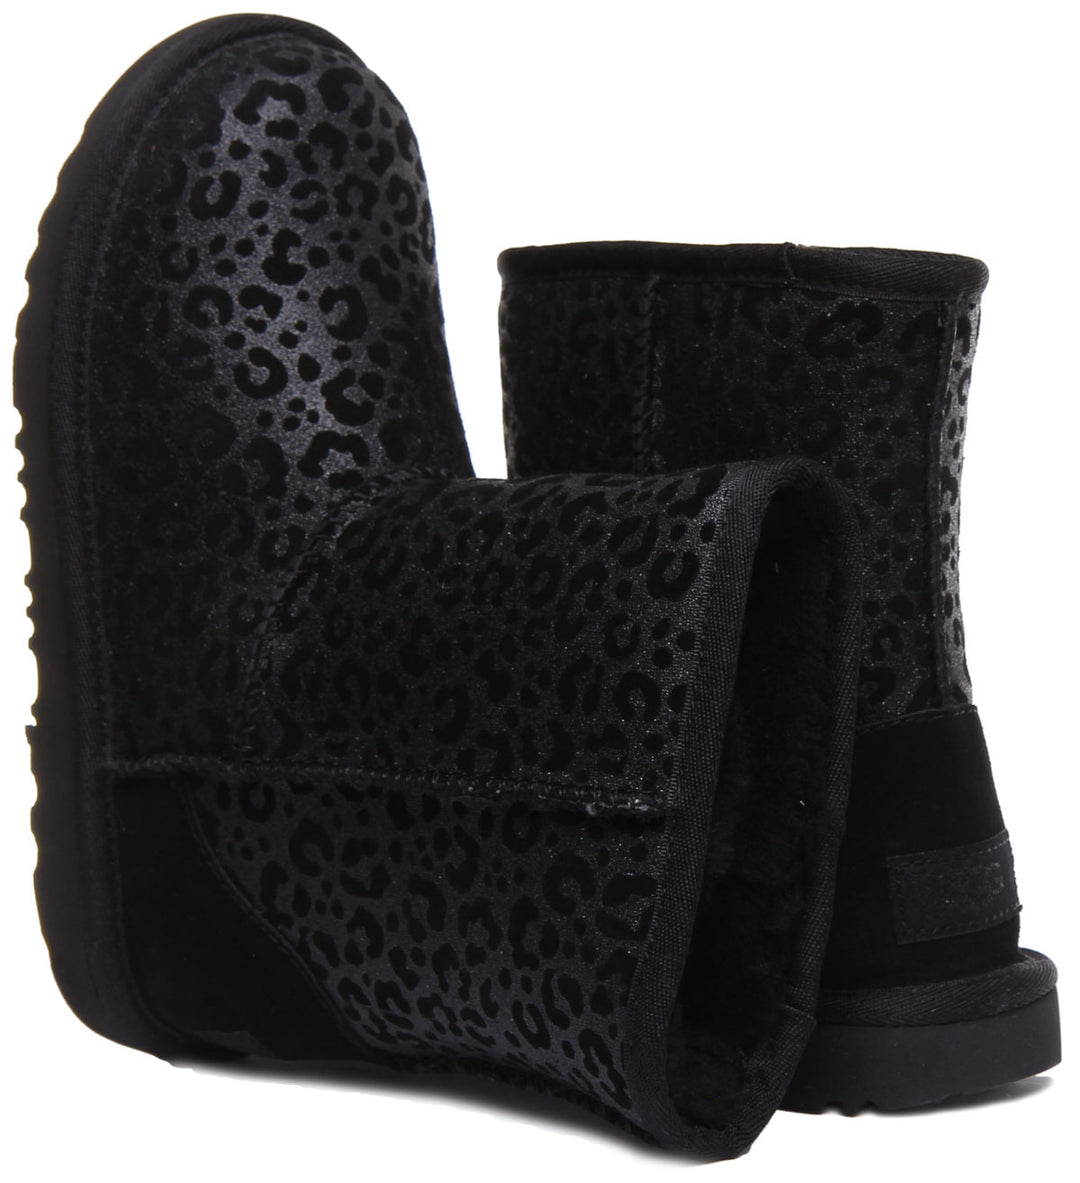 Ugg Australia Classic 2 Glitter Boot In Black For Youth